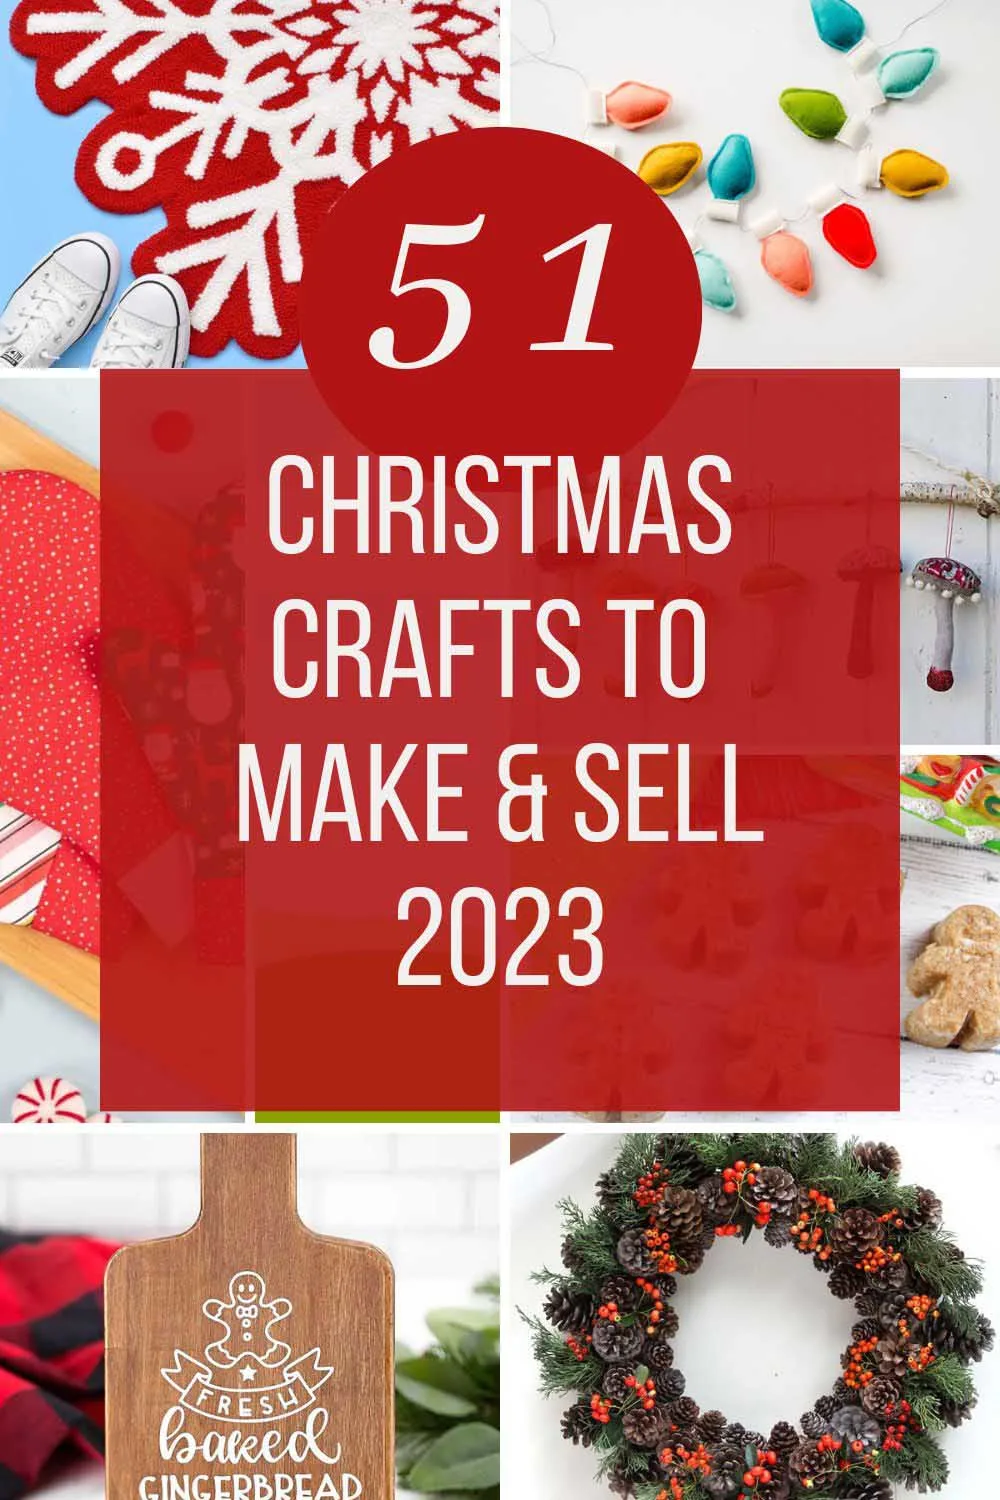 https://www.pillarboxblue.com/wp-content/uploads/2023/09/Christmas-crafts-make-and-sell-pin.jpg.webp